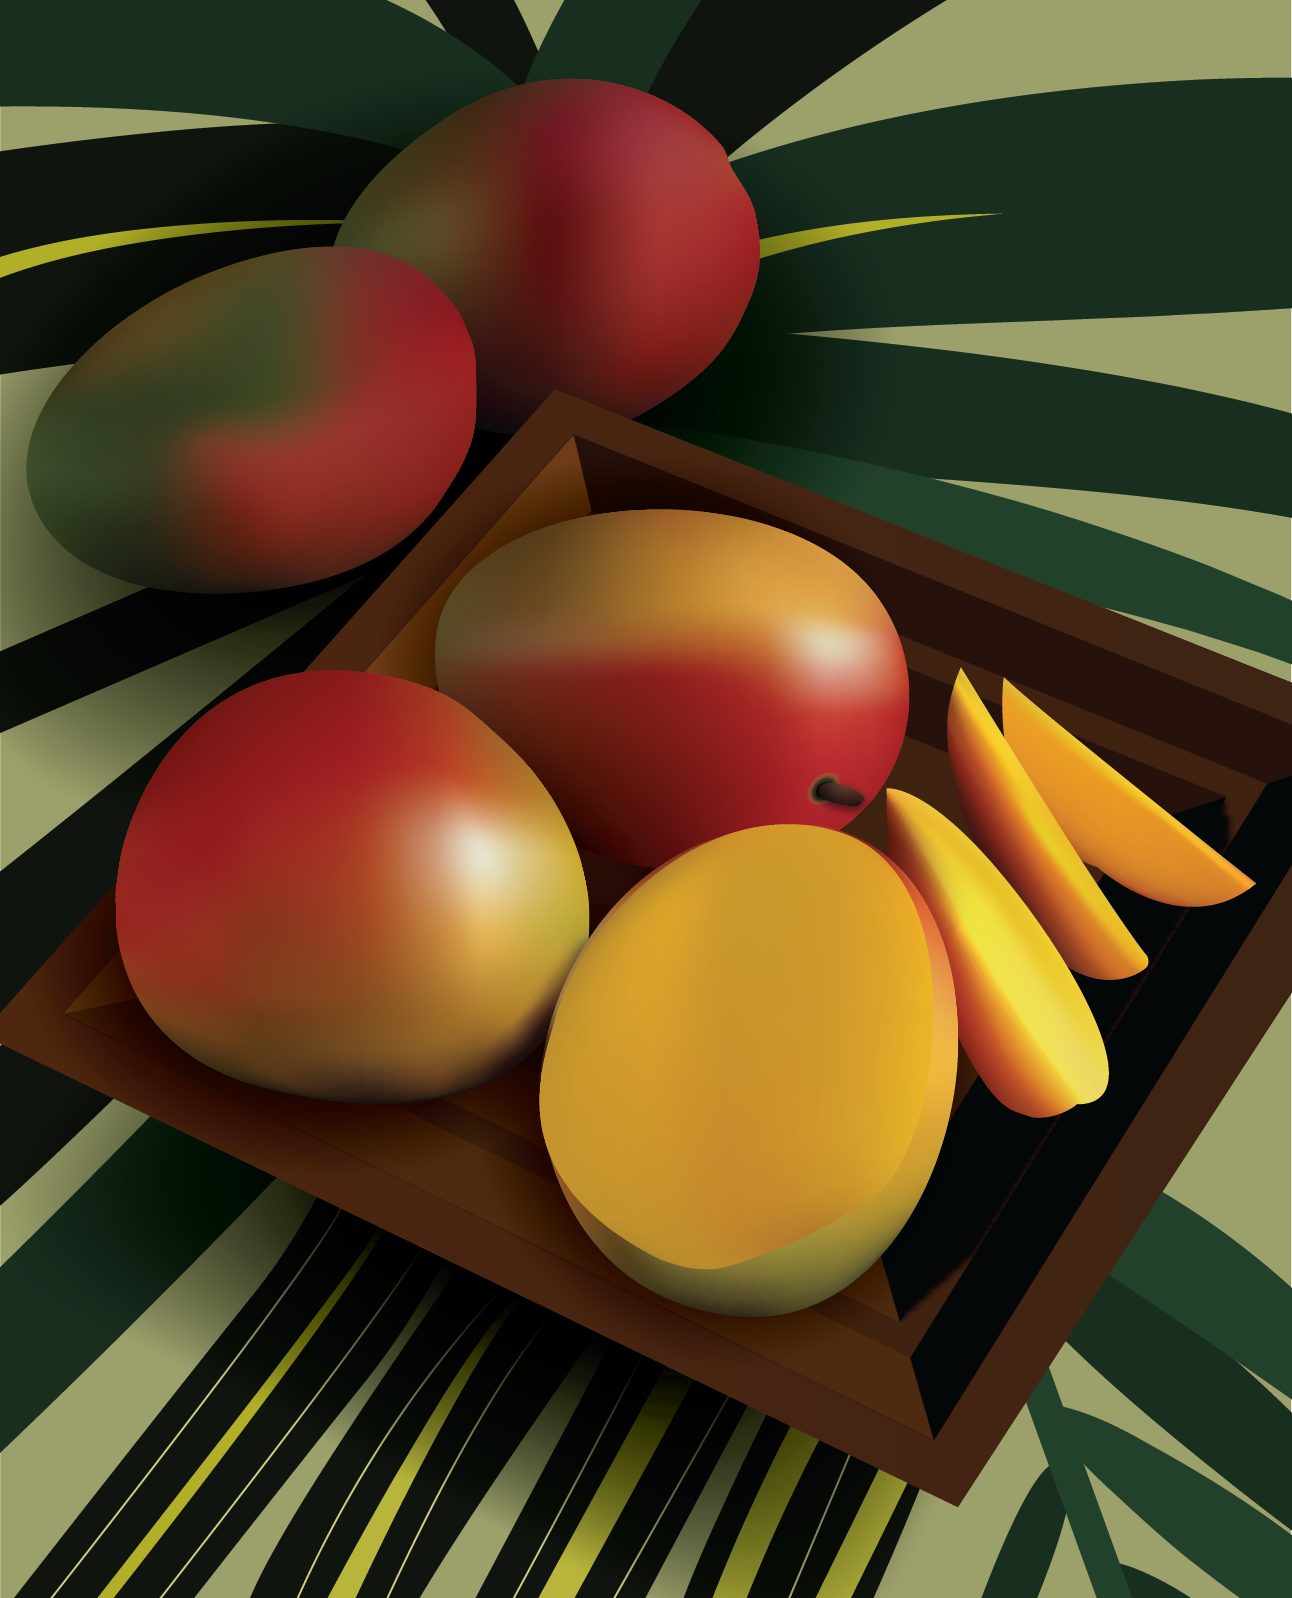 A vector illustration of cut mangoes in a wooden bowl, with palm leaves in the background.